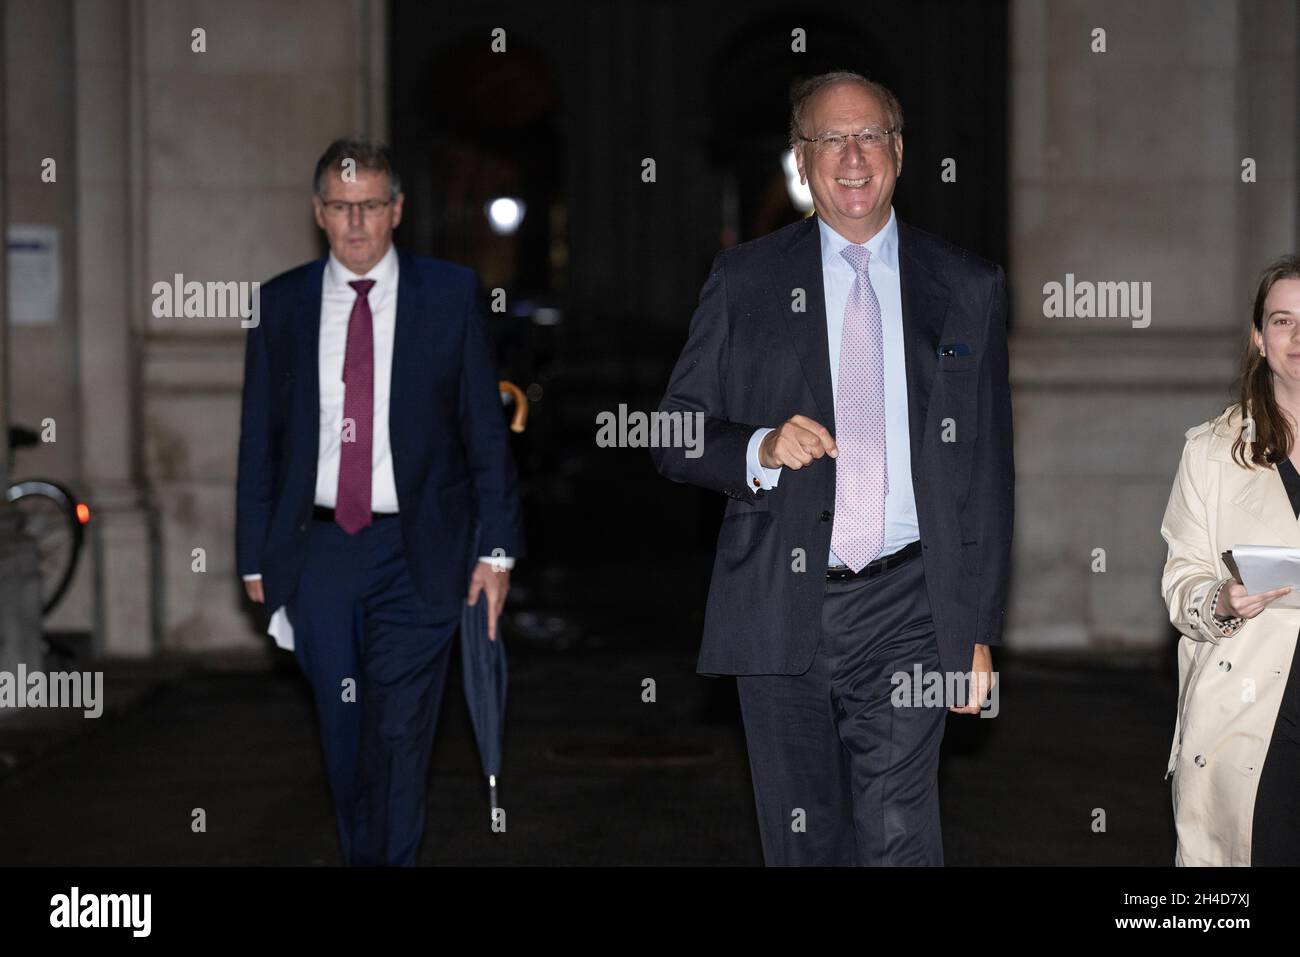 Prime Minister invites world’s top business leaders including Larry Fink Chairman and CEO of BlackRock to Downing Street to establish 'Global Britain'. Stock Photo